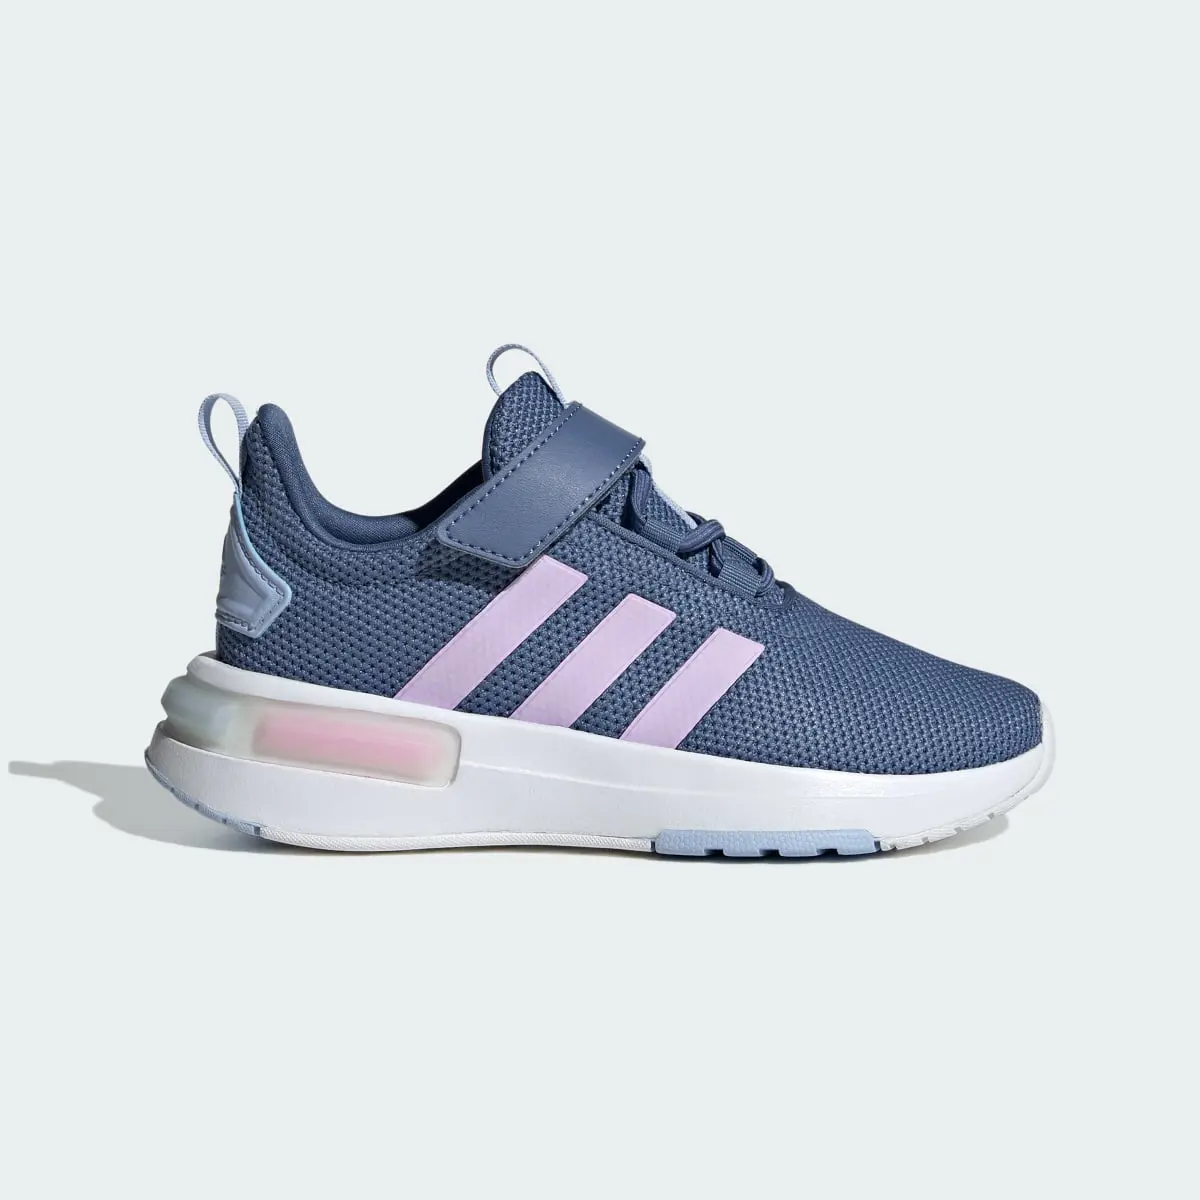 Adidas Racer TR23 Shoes Kids. 2